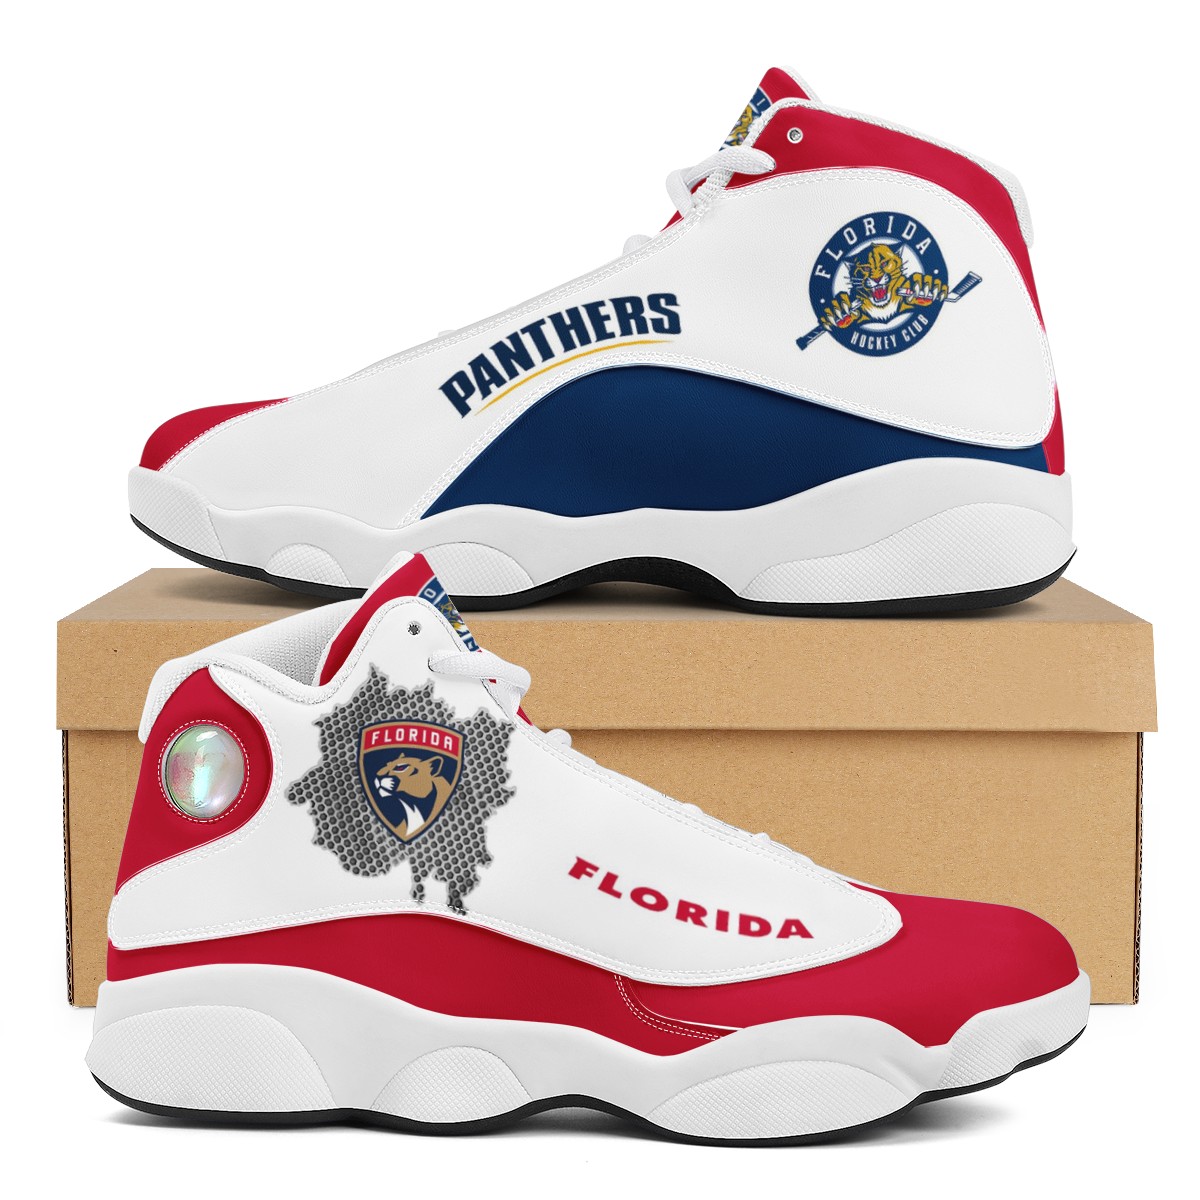 Women's Florida Panthers Limited Edition JD13 Sneakers 001